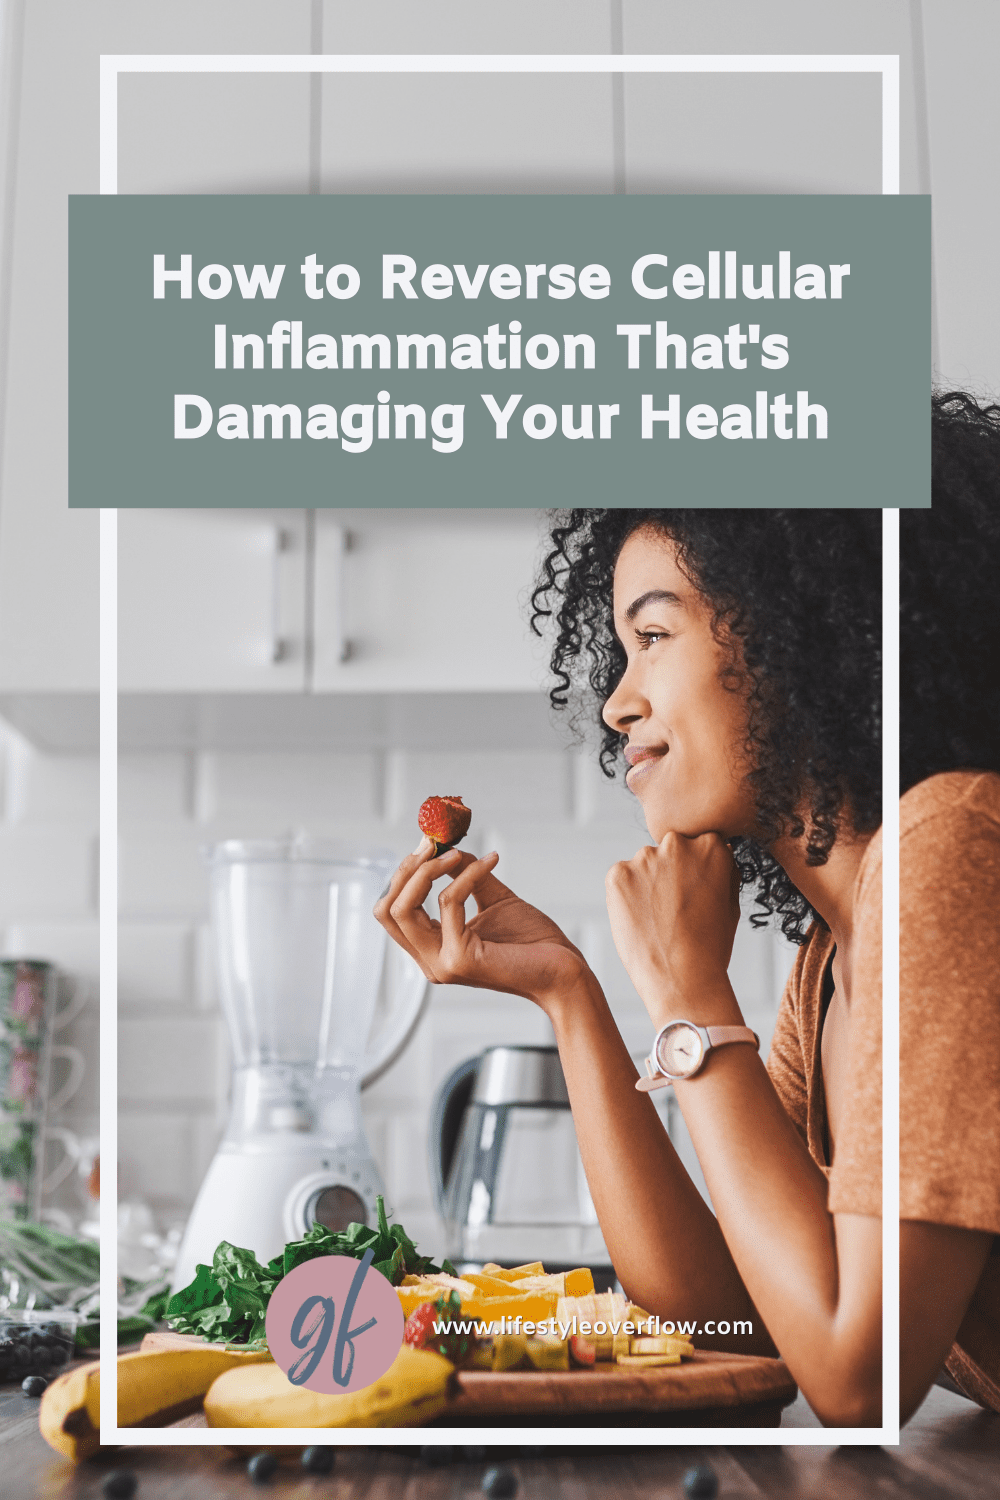 Photo of a woman eating fruit in a kitchen with a green text box: how to reverse cellular inflammation that's damaging your health (by Gina Forcatto)